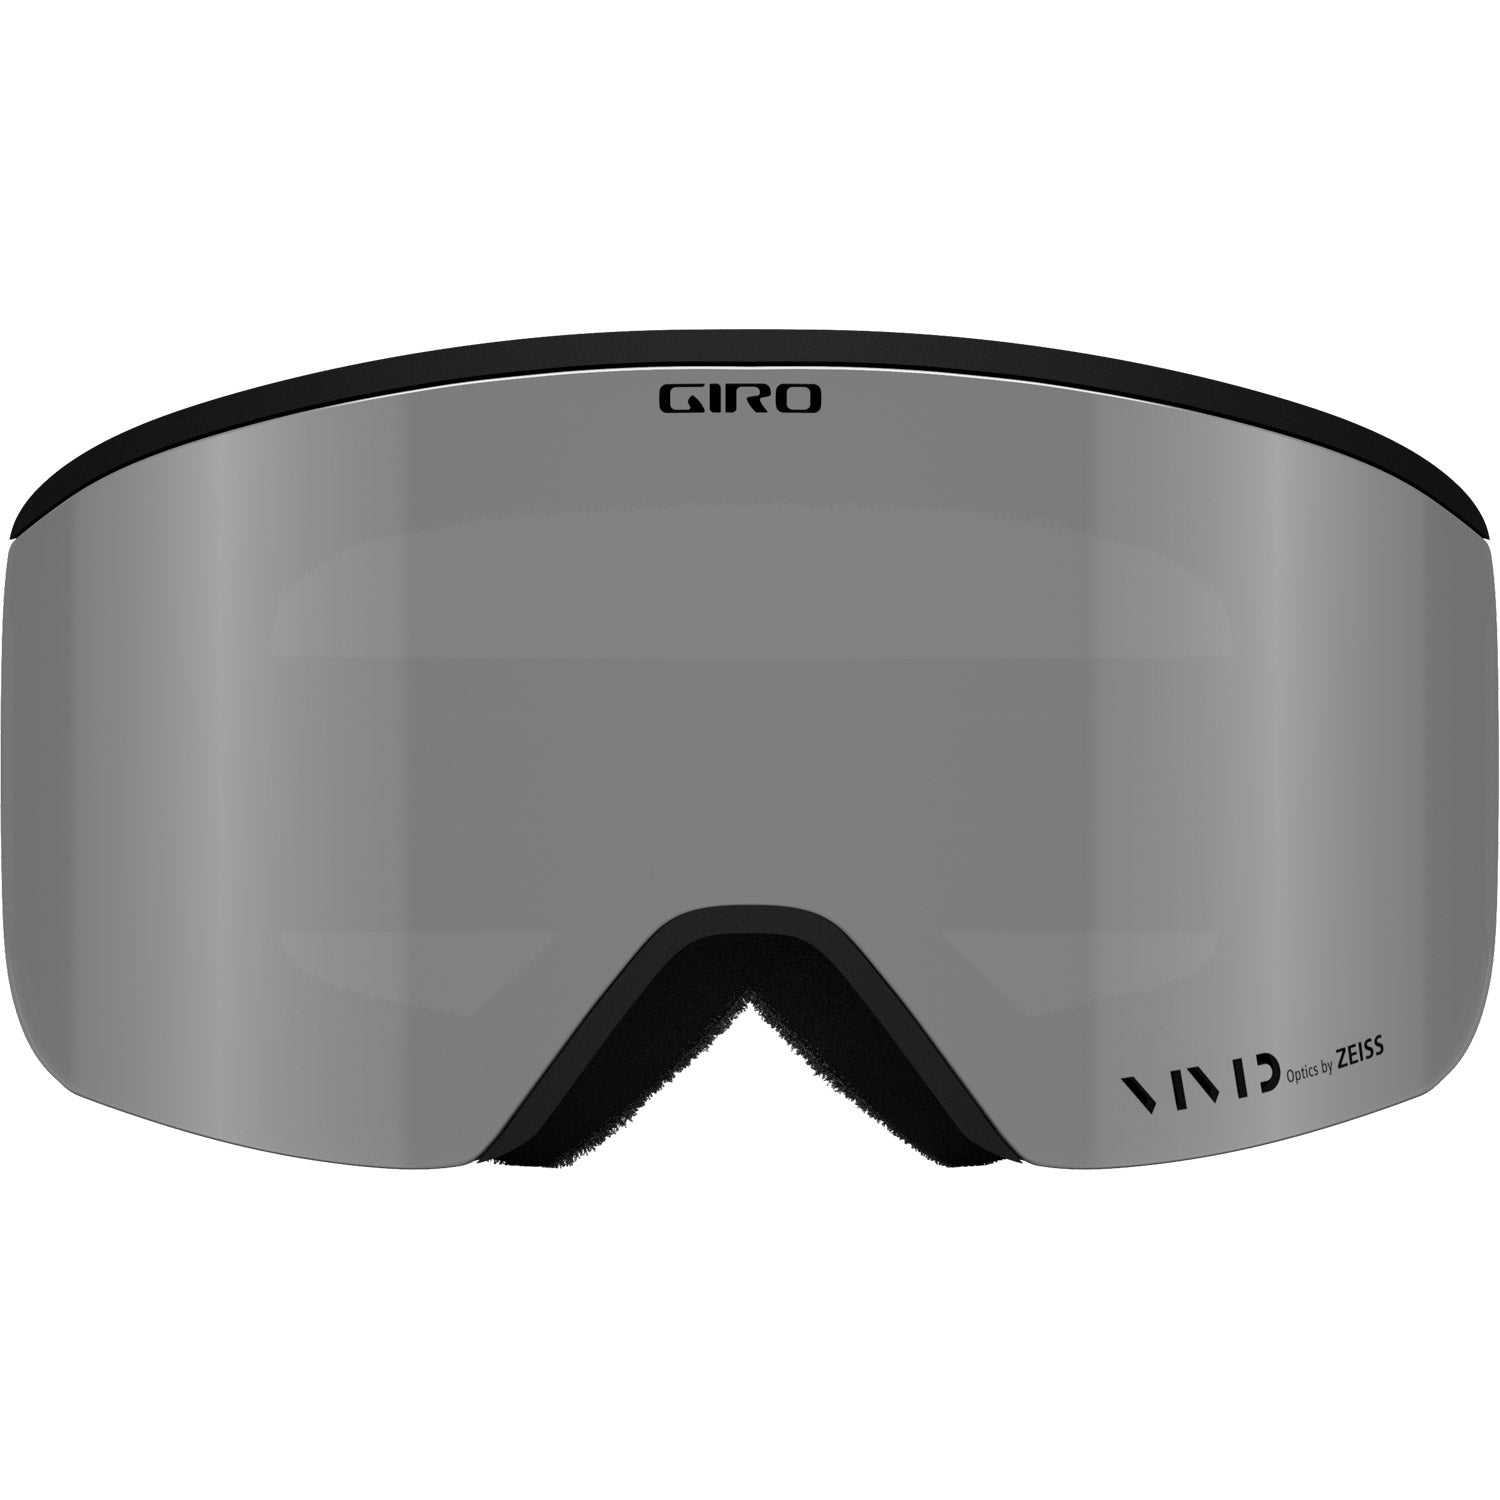 Axis Snow Goggles